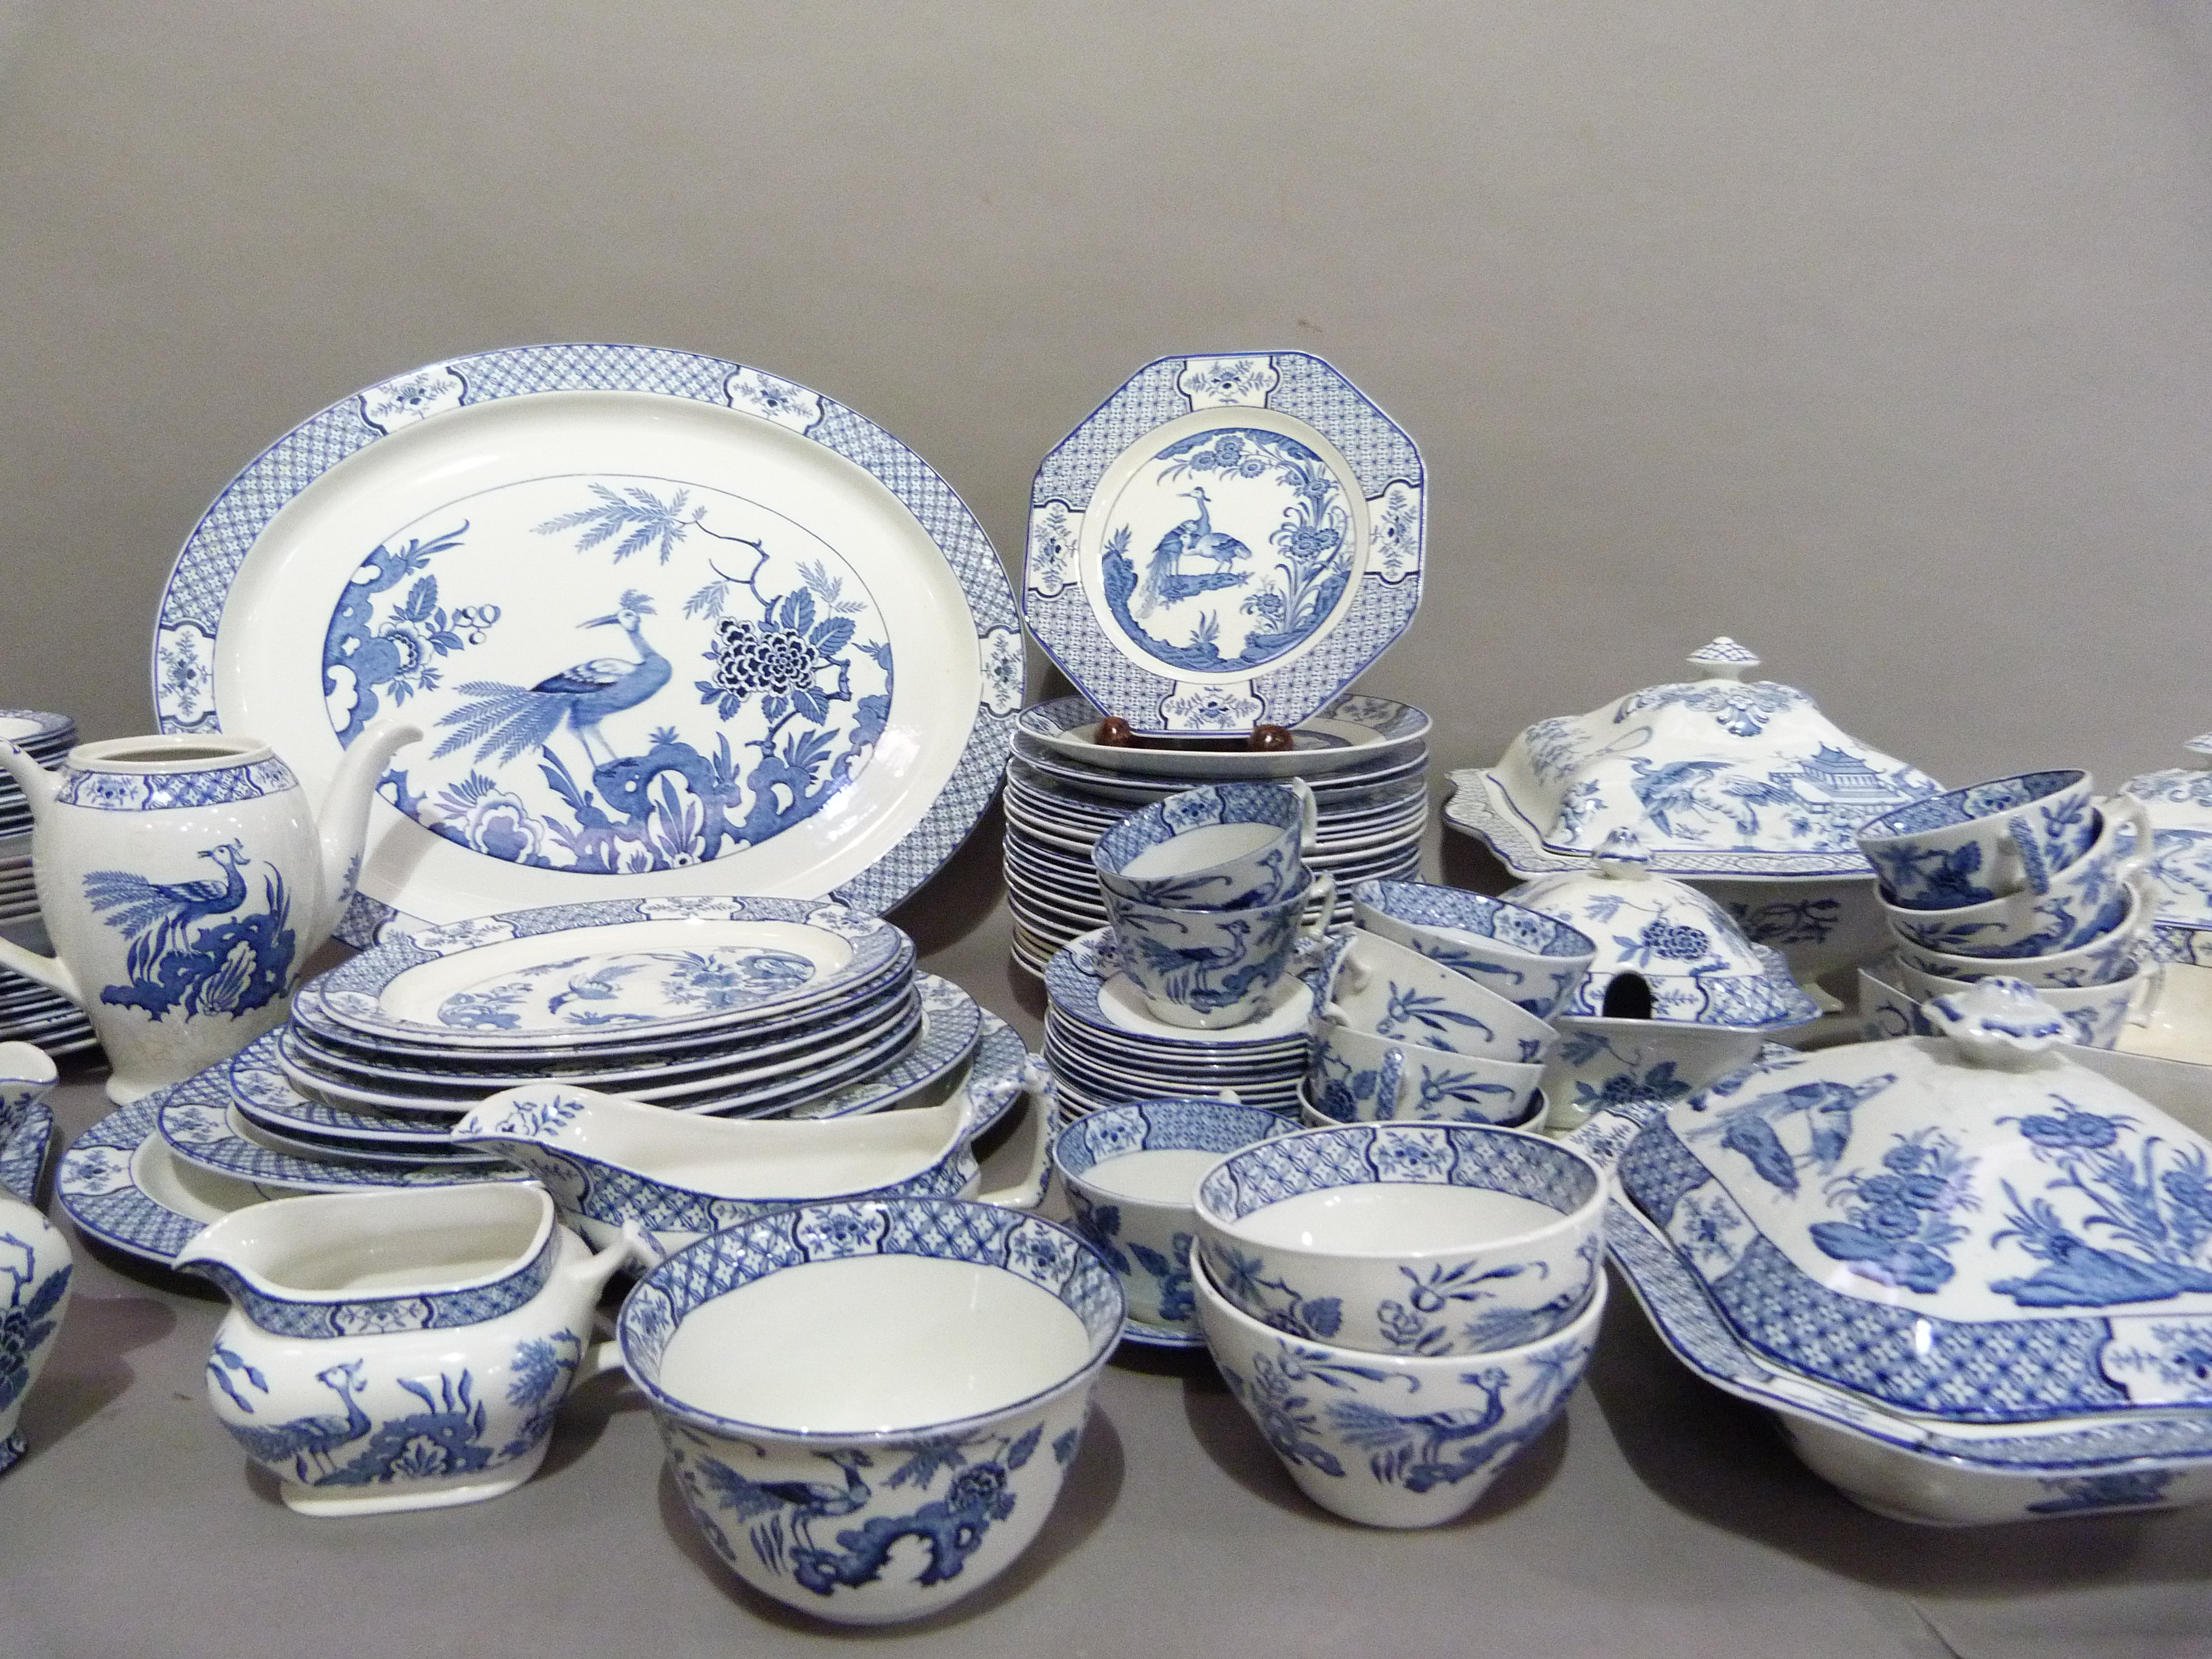 An extensive yuan ware blue and white dinner service